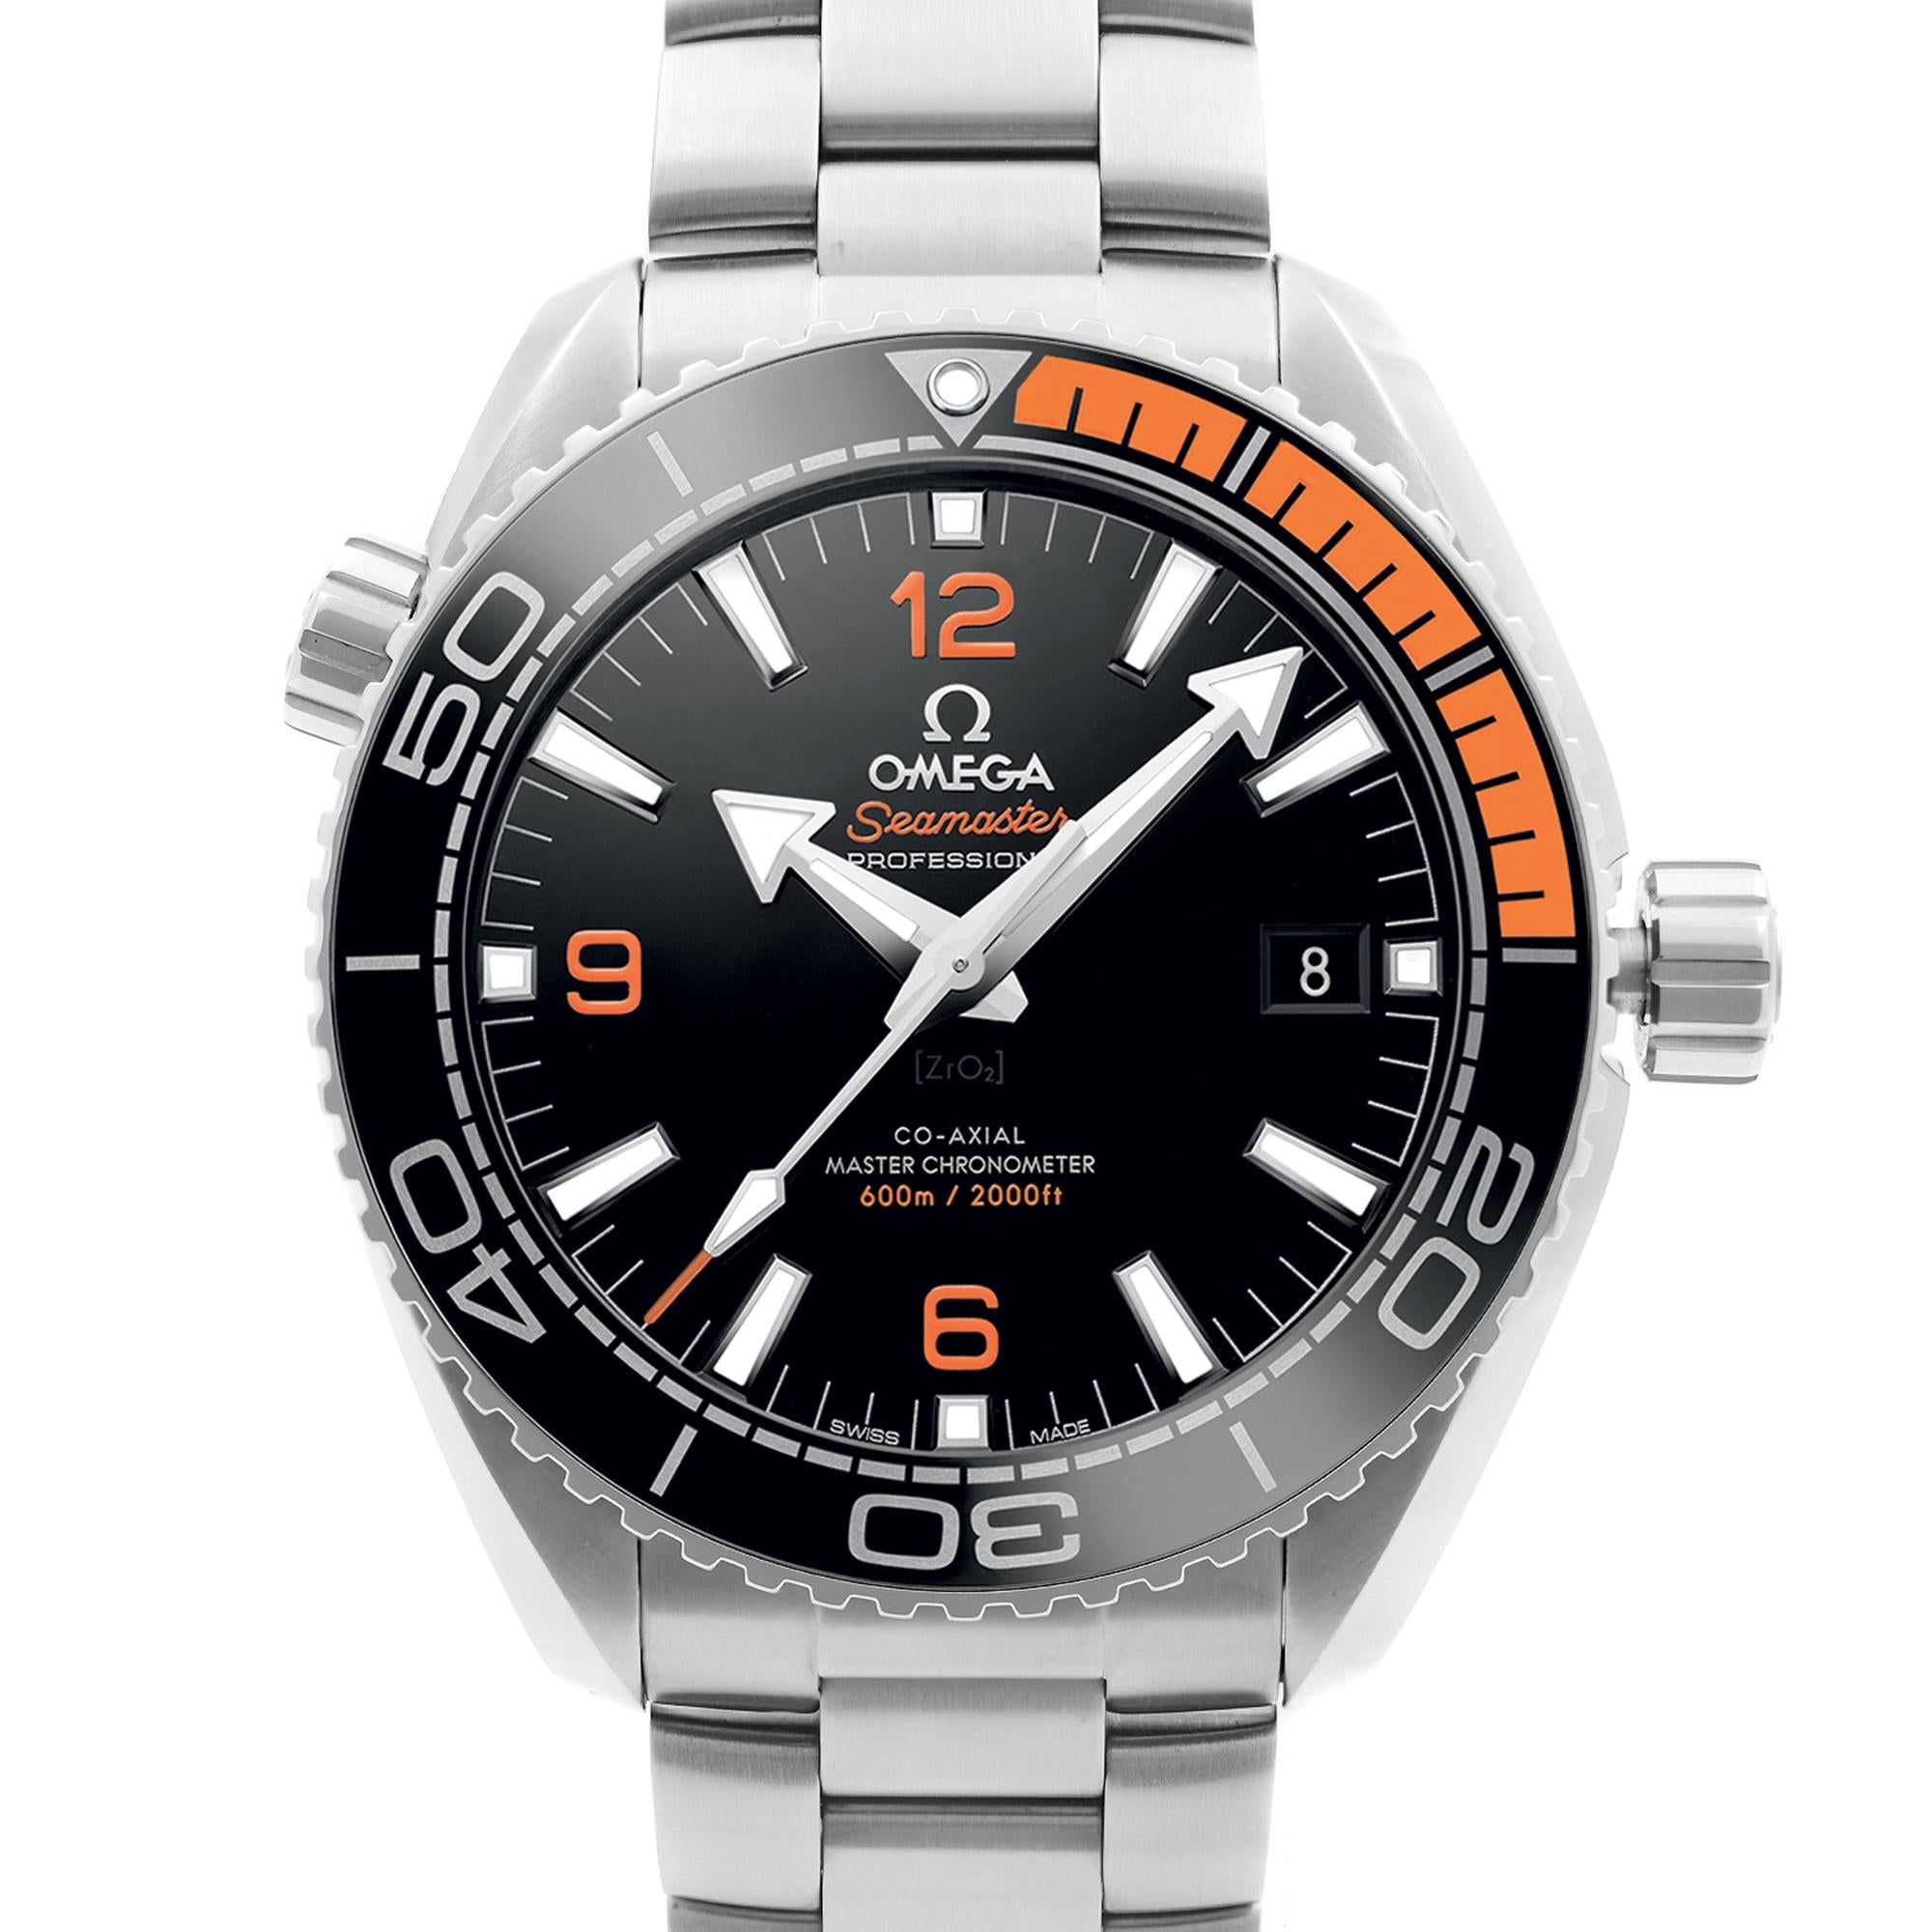 Display Model Omega Seamaster Planet Ocean Automatic Men's Watch 215.30.44.21.01.002 This Beautiful Timepiece Features Stainless Steel Case and Bracelet,  Rotating Coin Edge Stainless Steel Bezel with a Black and Orange Ceramic Top Ring, Black Dial